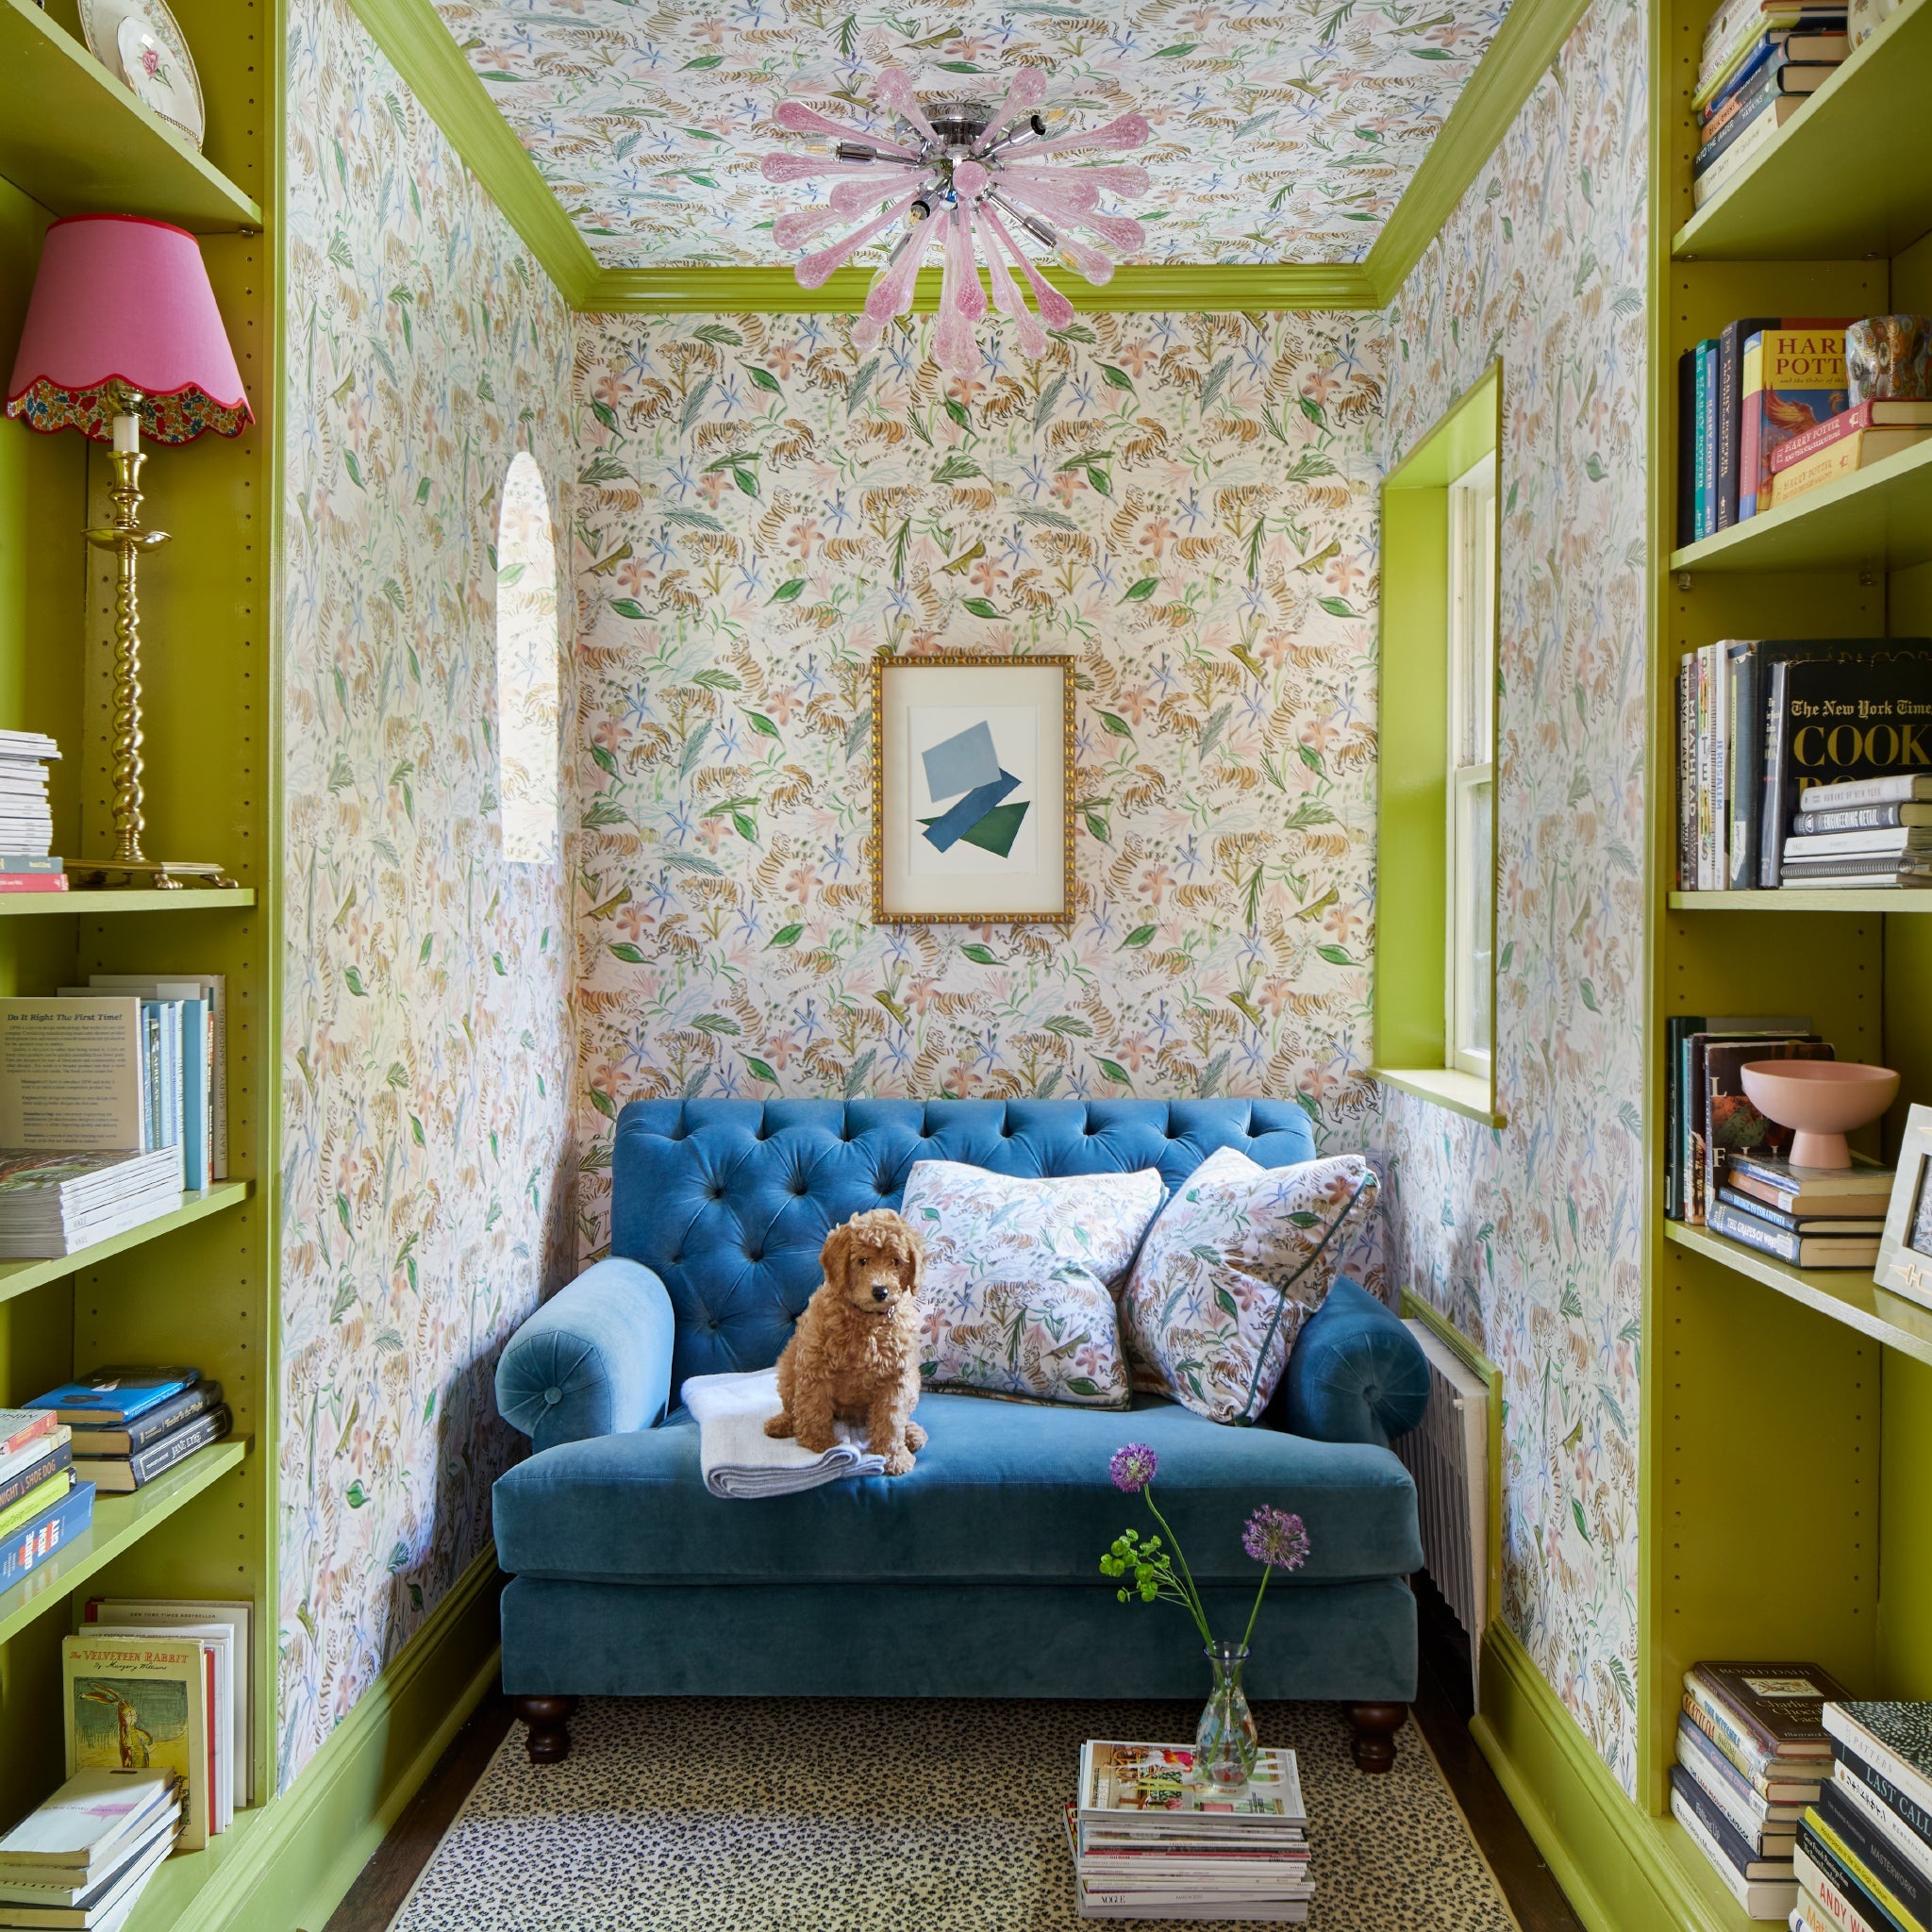 Library corner with books on shelves styled with Pink Chinoiserie Tiger Printed Wallpaper and blue couch with brown dog and Pink Chinoiserie Tiger Printed Pillows on top